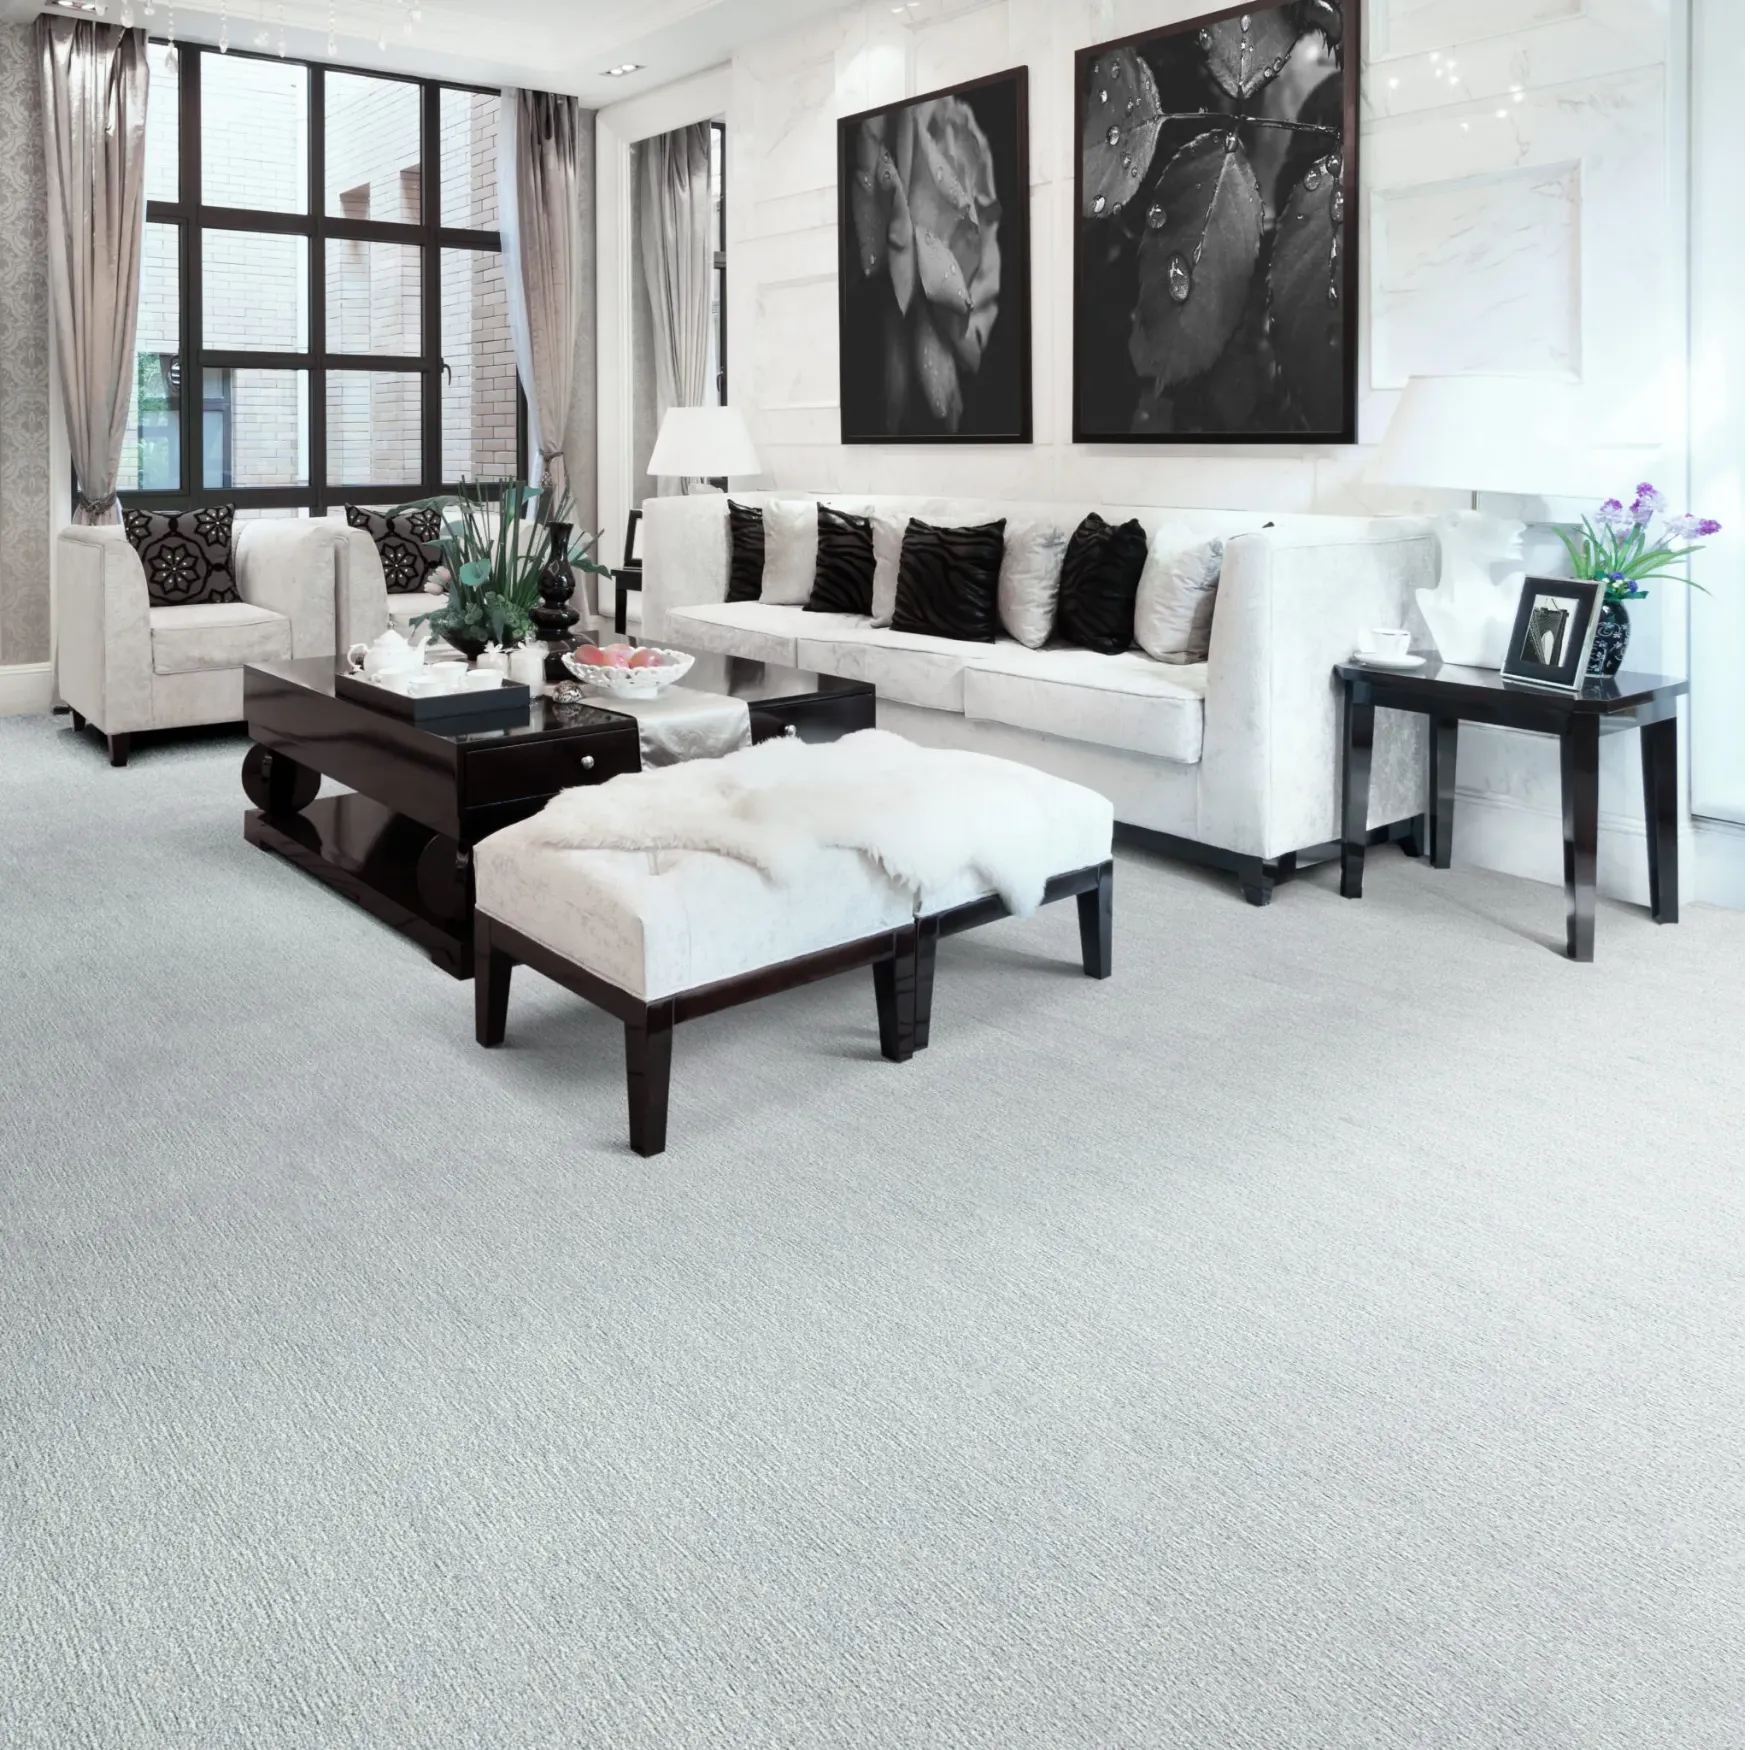 Image of Room With Carpeting Available at Kaoud Rugs and Carpet in West Hartford and Manchester, Connecticut